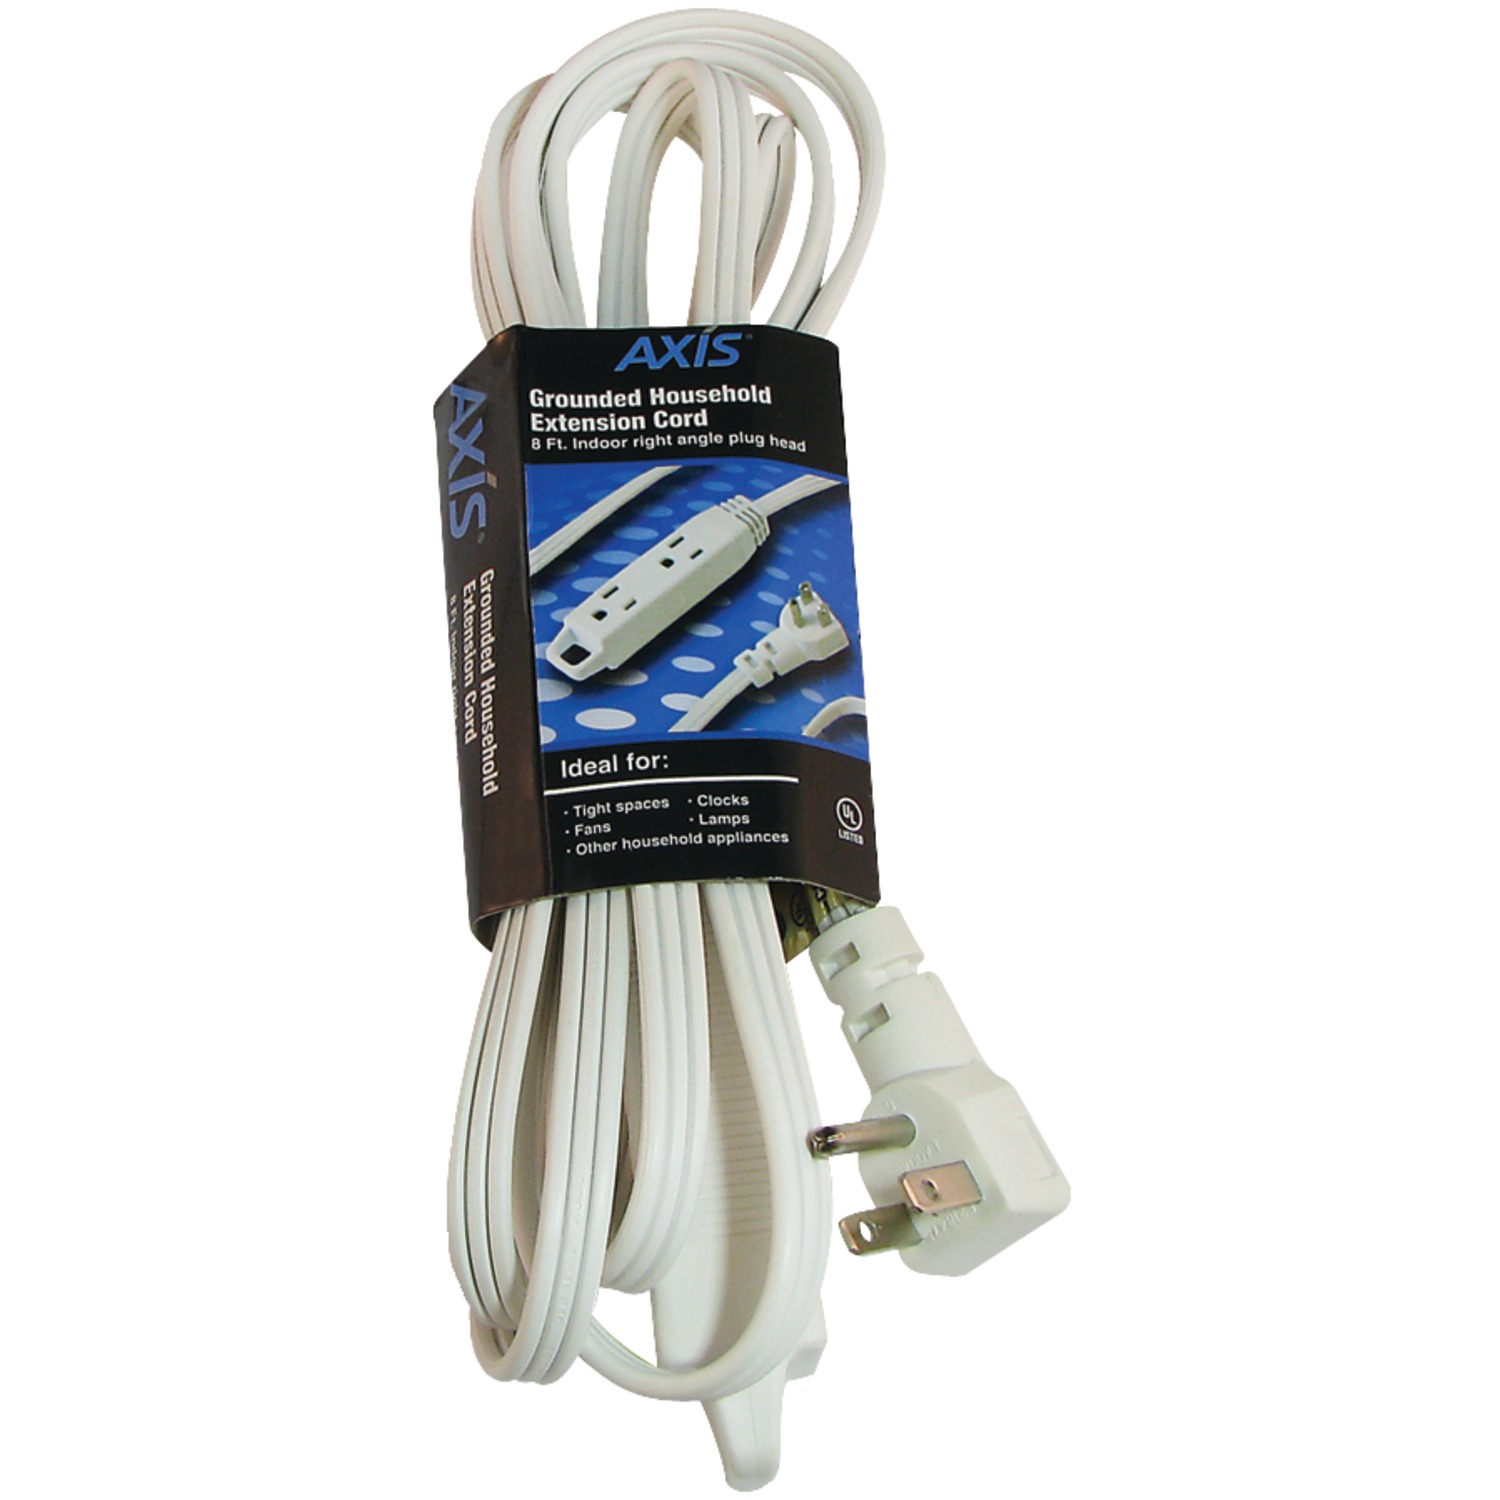 Axis 3-outlet Indoor Extension Cord, 8ft (white) 4 Pack - image 5 of 11